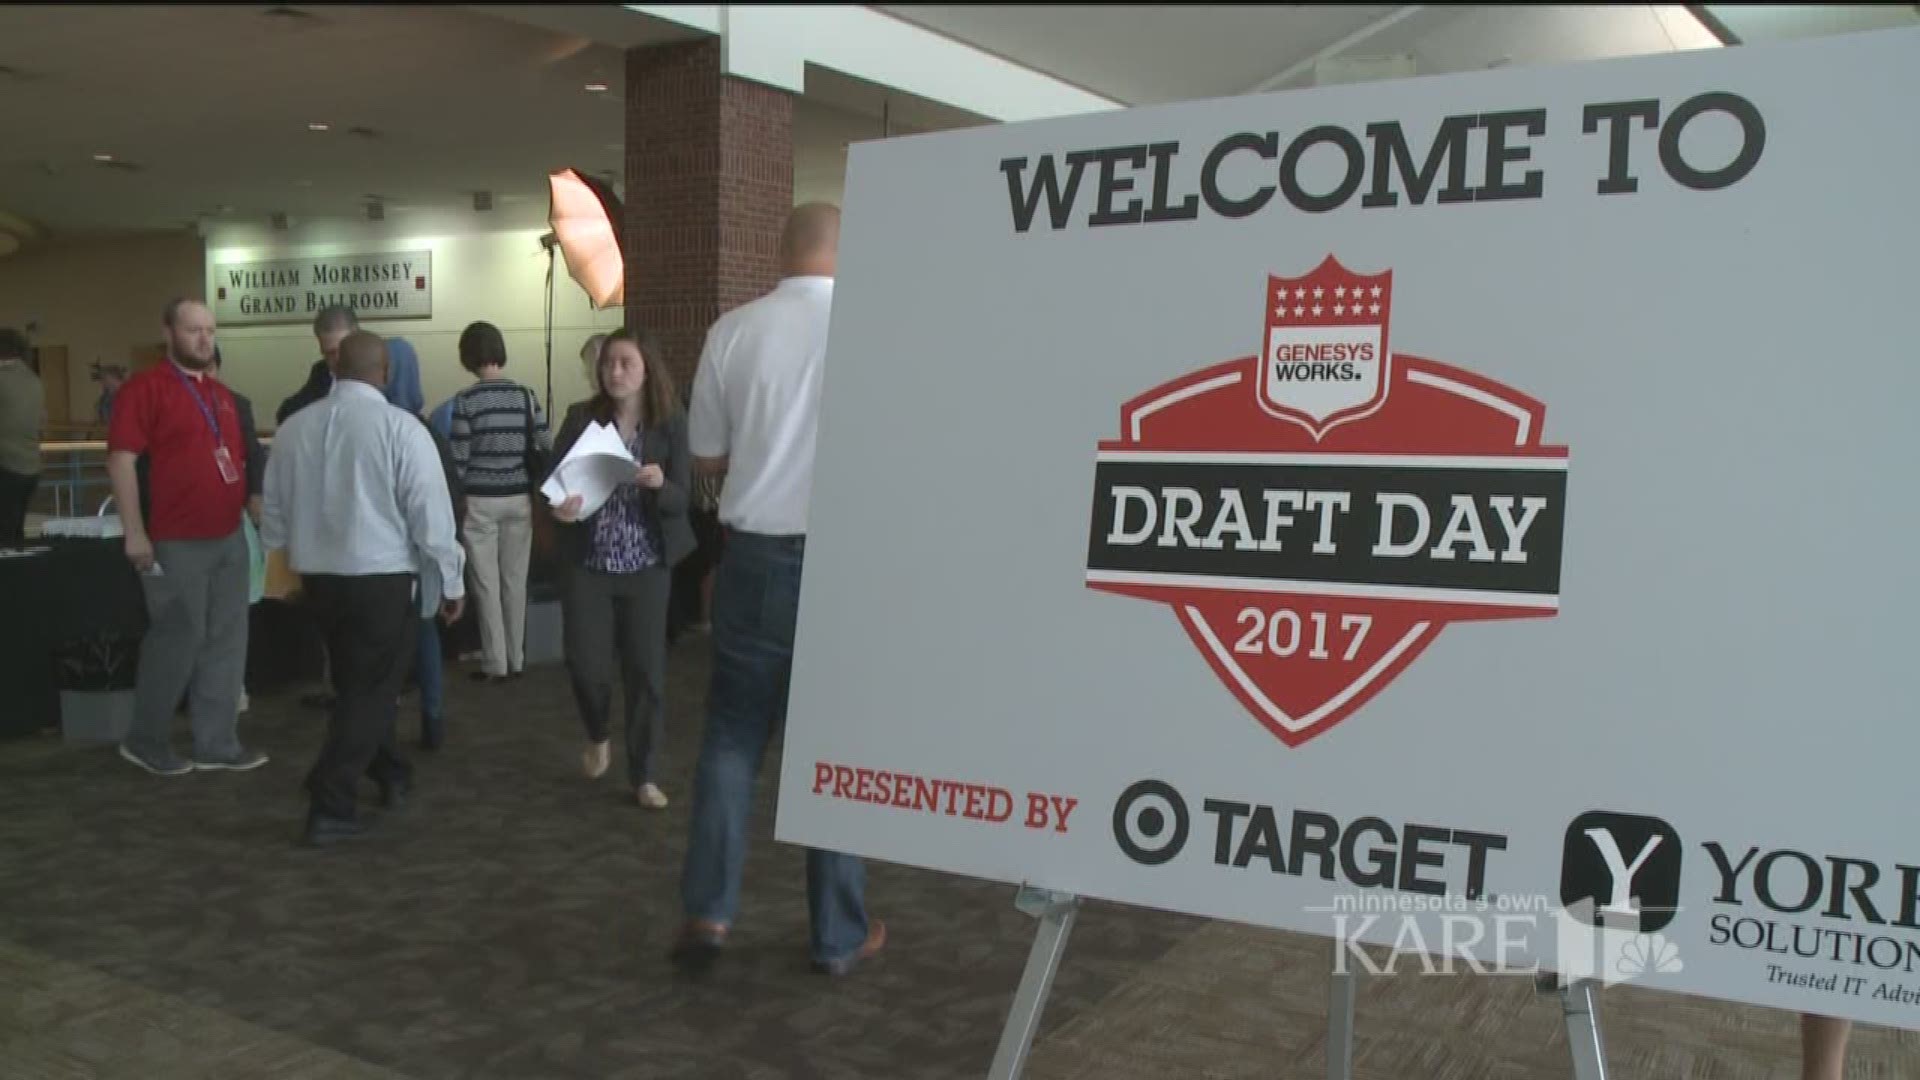 On Tuesday morning, high school students and their families packed the St. Paul RiverCentre for the much-anticipated Draft Day. http://kare11.tv/2vBjoKE